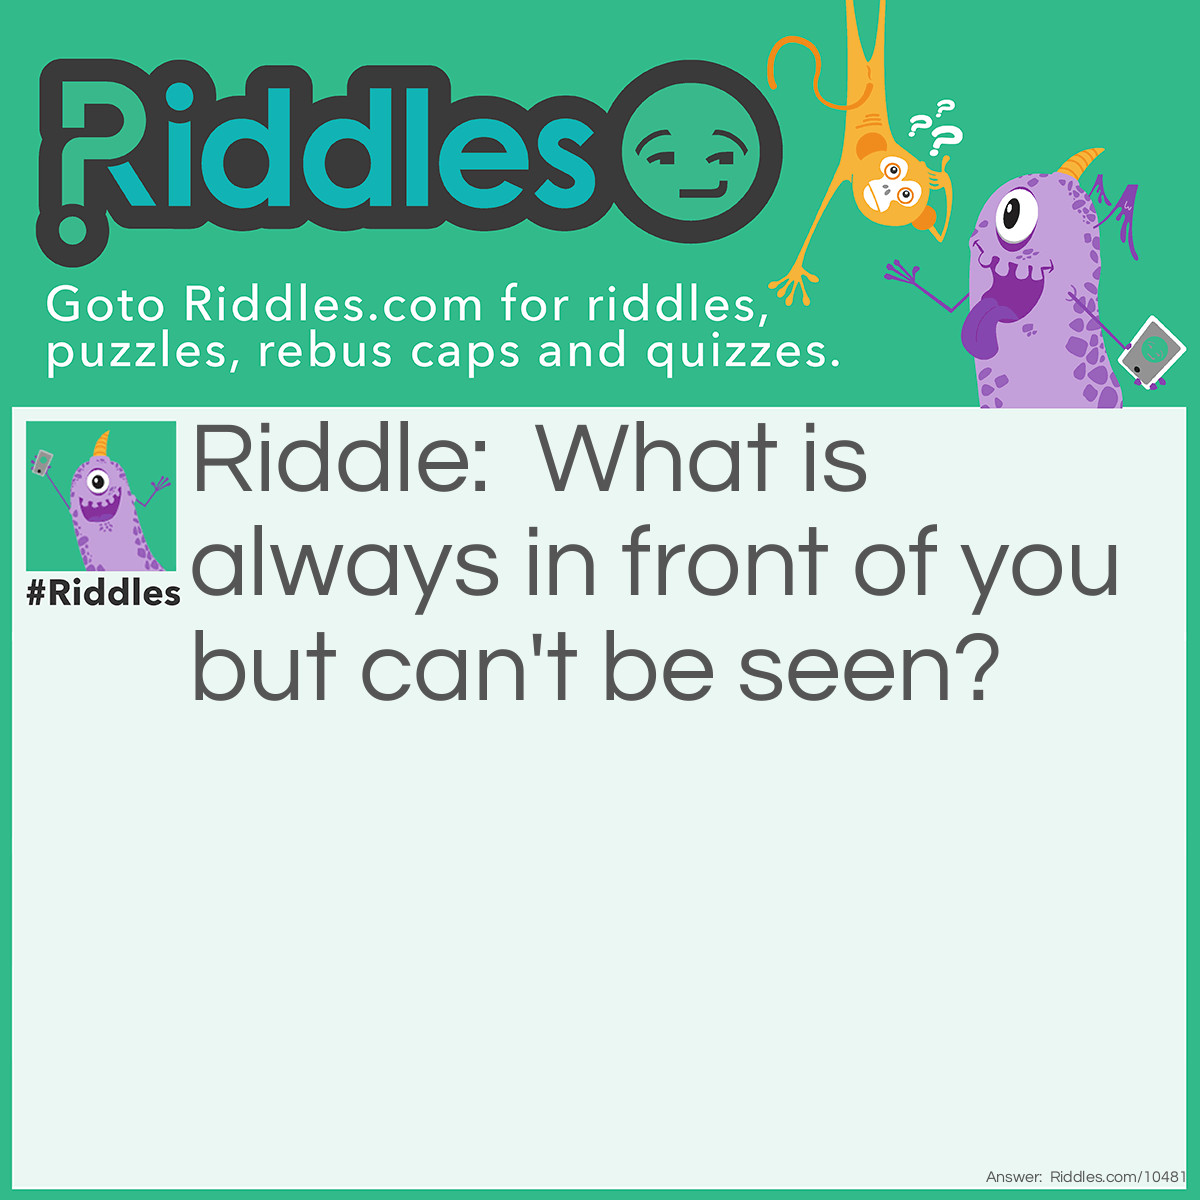 Riddle: What is always in front of you but can't be seen? Answer: The Future